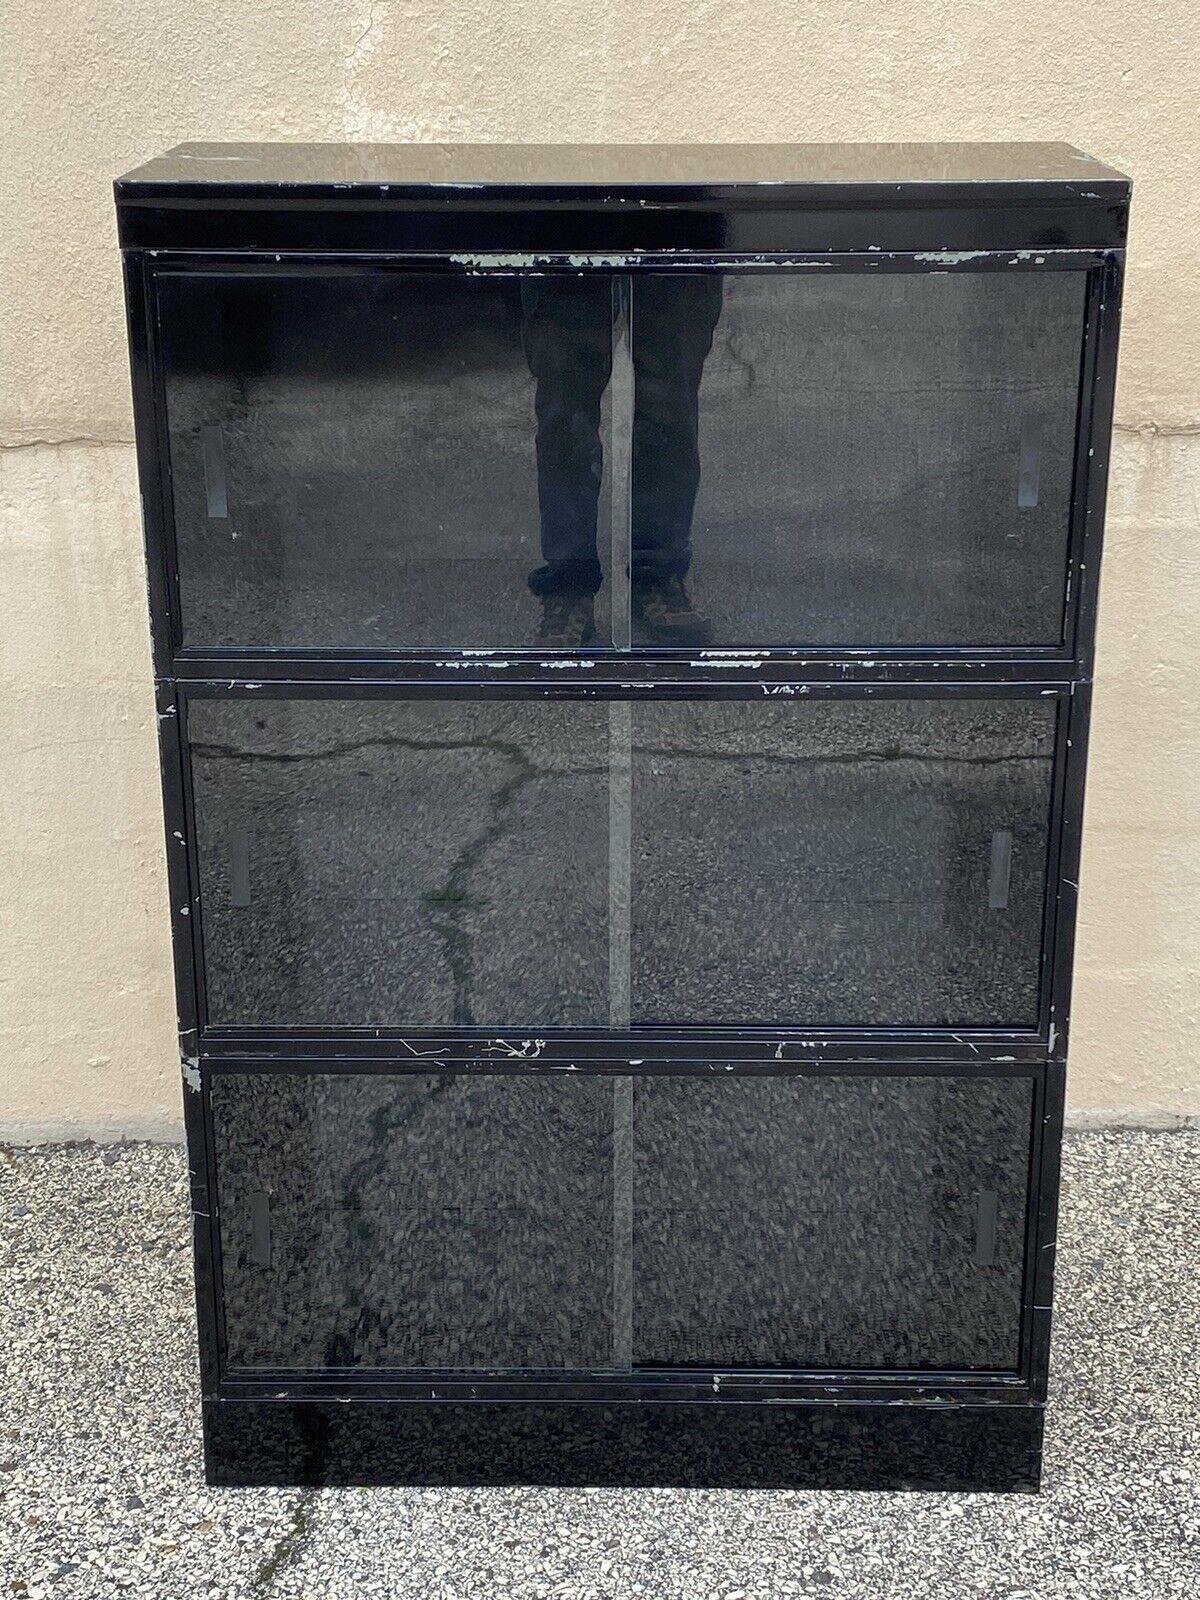 Vintage Byele Steel Metal Glass Sliding Door 3 Section Stacking Barrister Lawyers Bookcase. Circa Late 20th Century.
Dimensions : 50,5